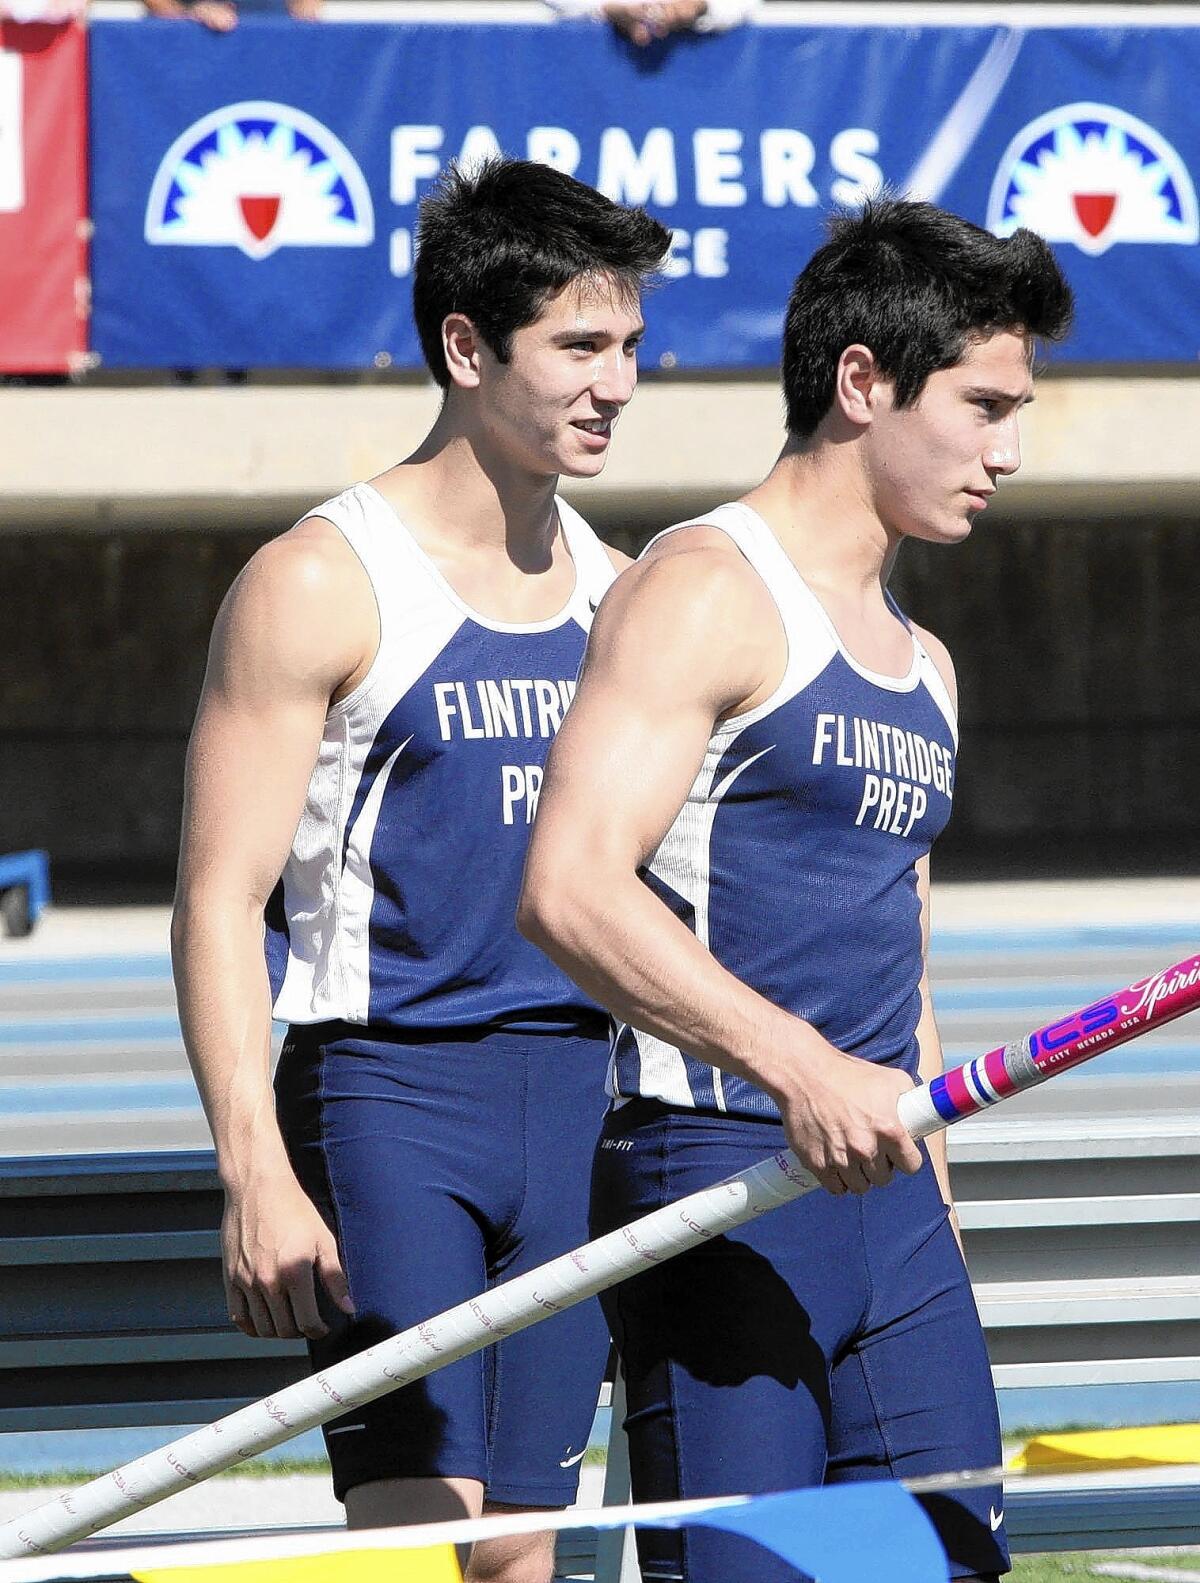 Flintridge Prep's Barrett Weiss, right, joins brother Gareth in qualifying for state with a vault of 15-2 during the CIF-SS Masters Meet at Cerritos College on Friday, May 30, 2014.